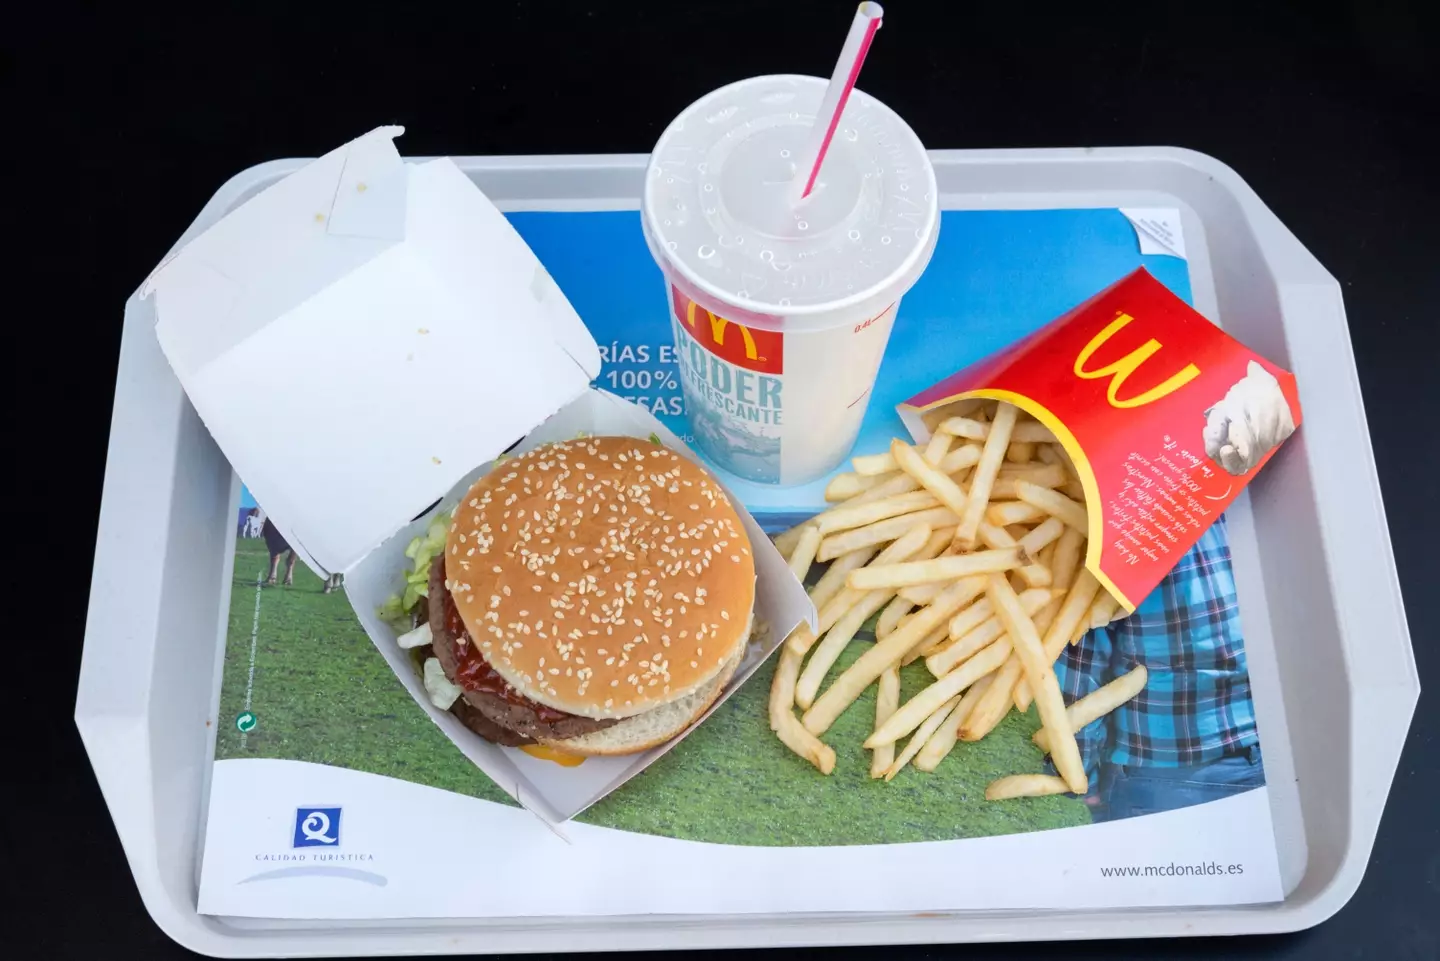 Gone are the days when McDonald's meals came with plastic straws.